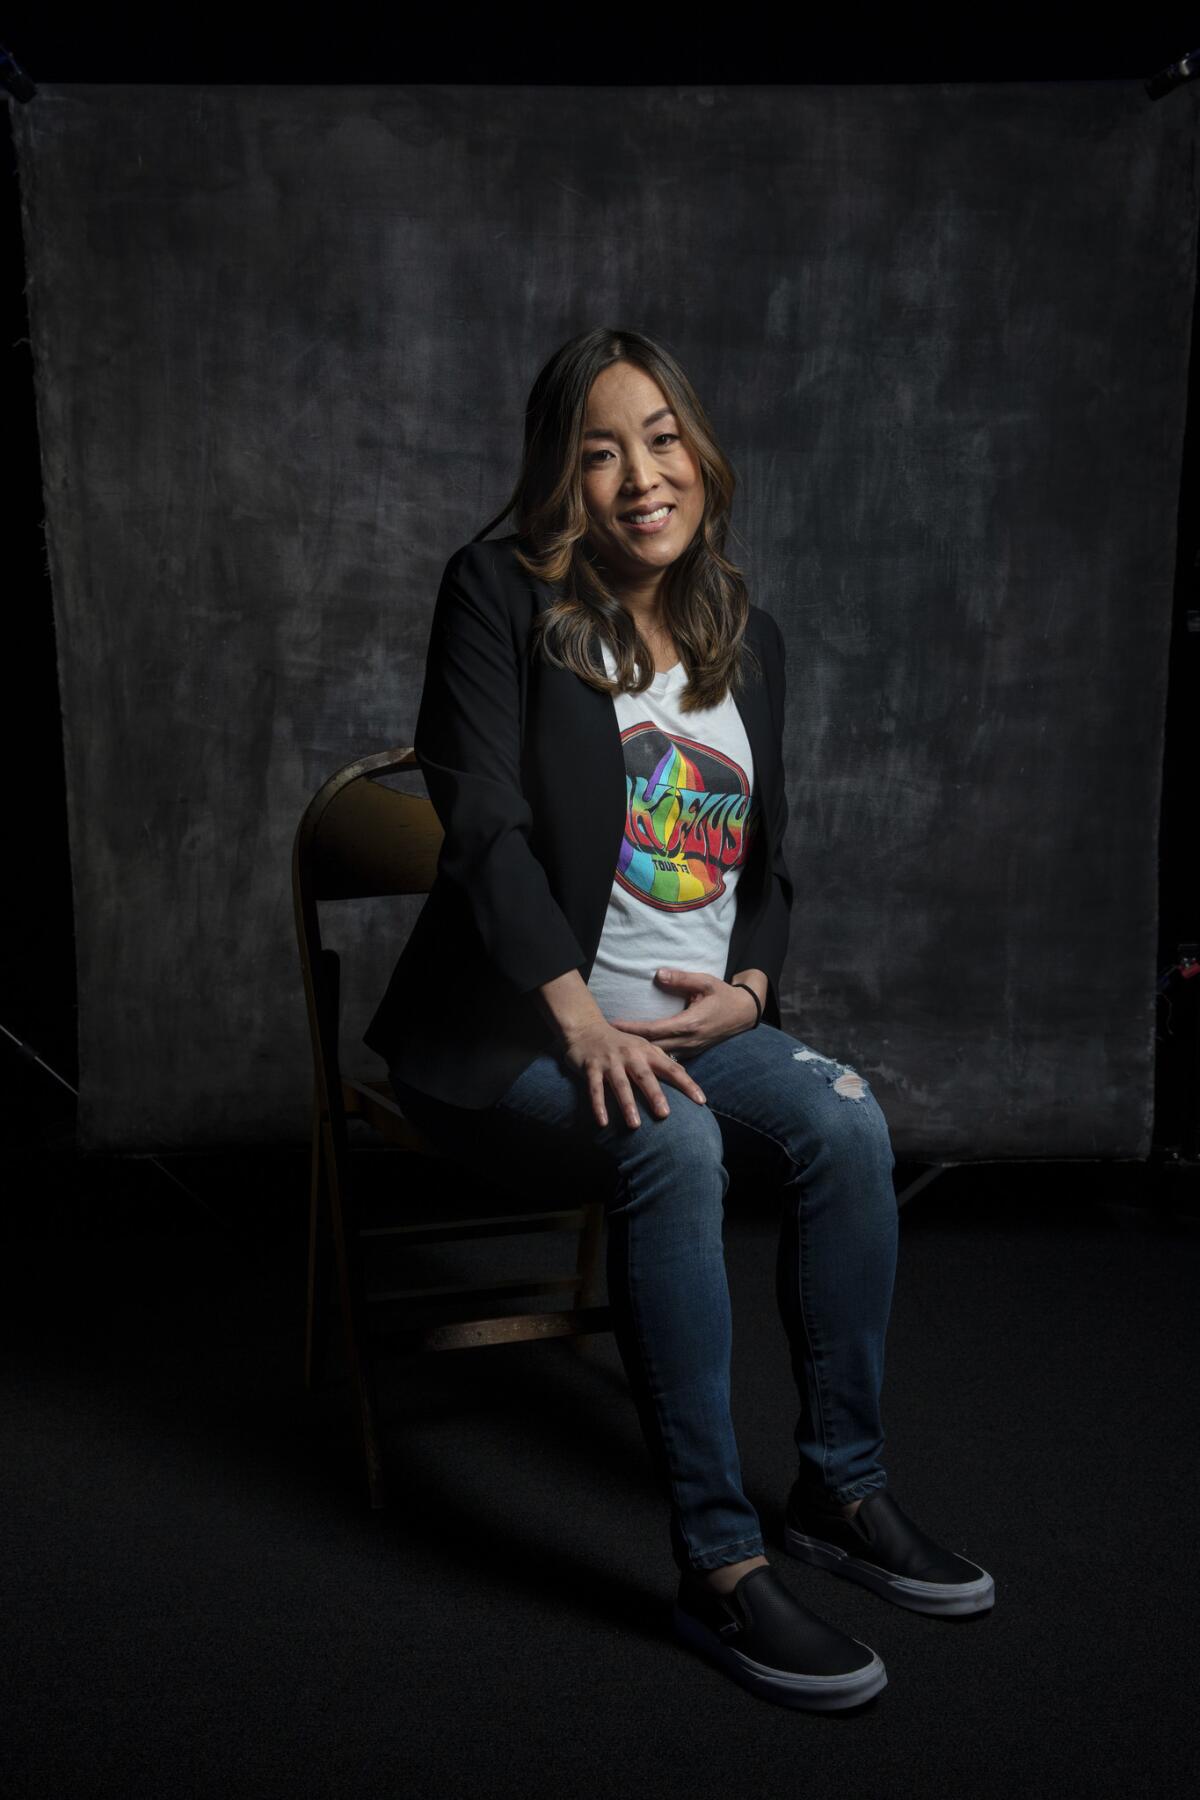 Audrey Chon sits for a photo in the L.A. Times photo studio during PaleyFest at the Dolby Theatre in Hollywood.